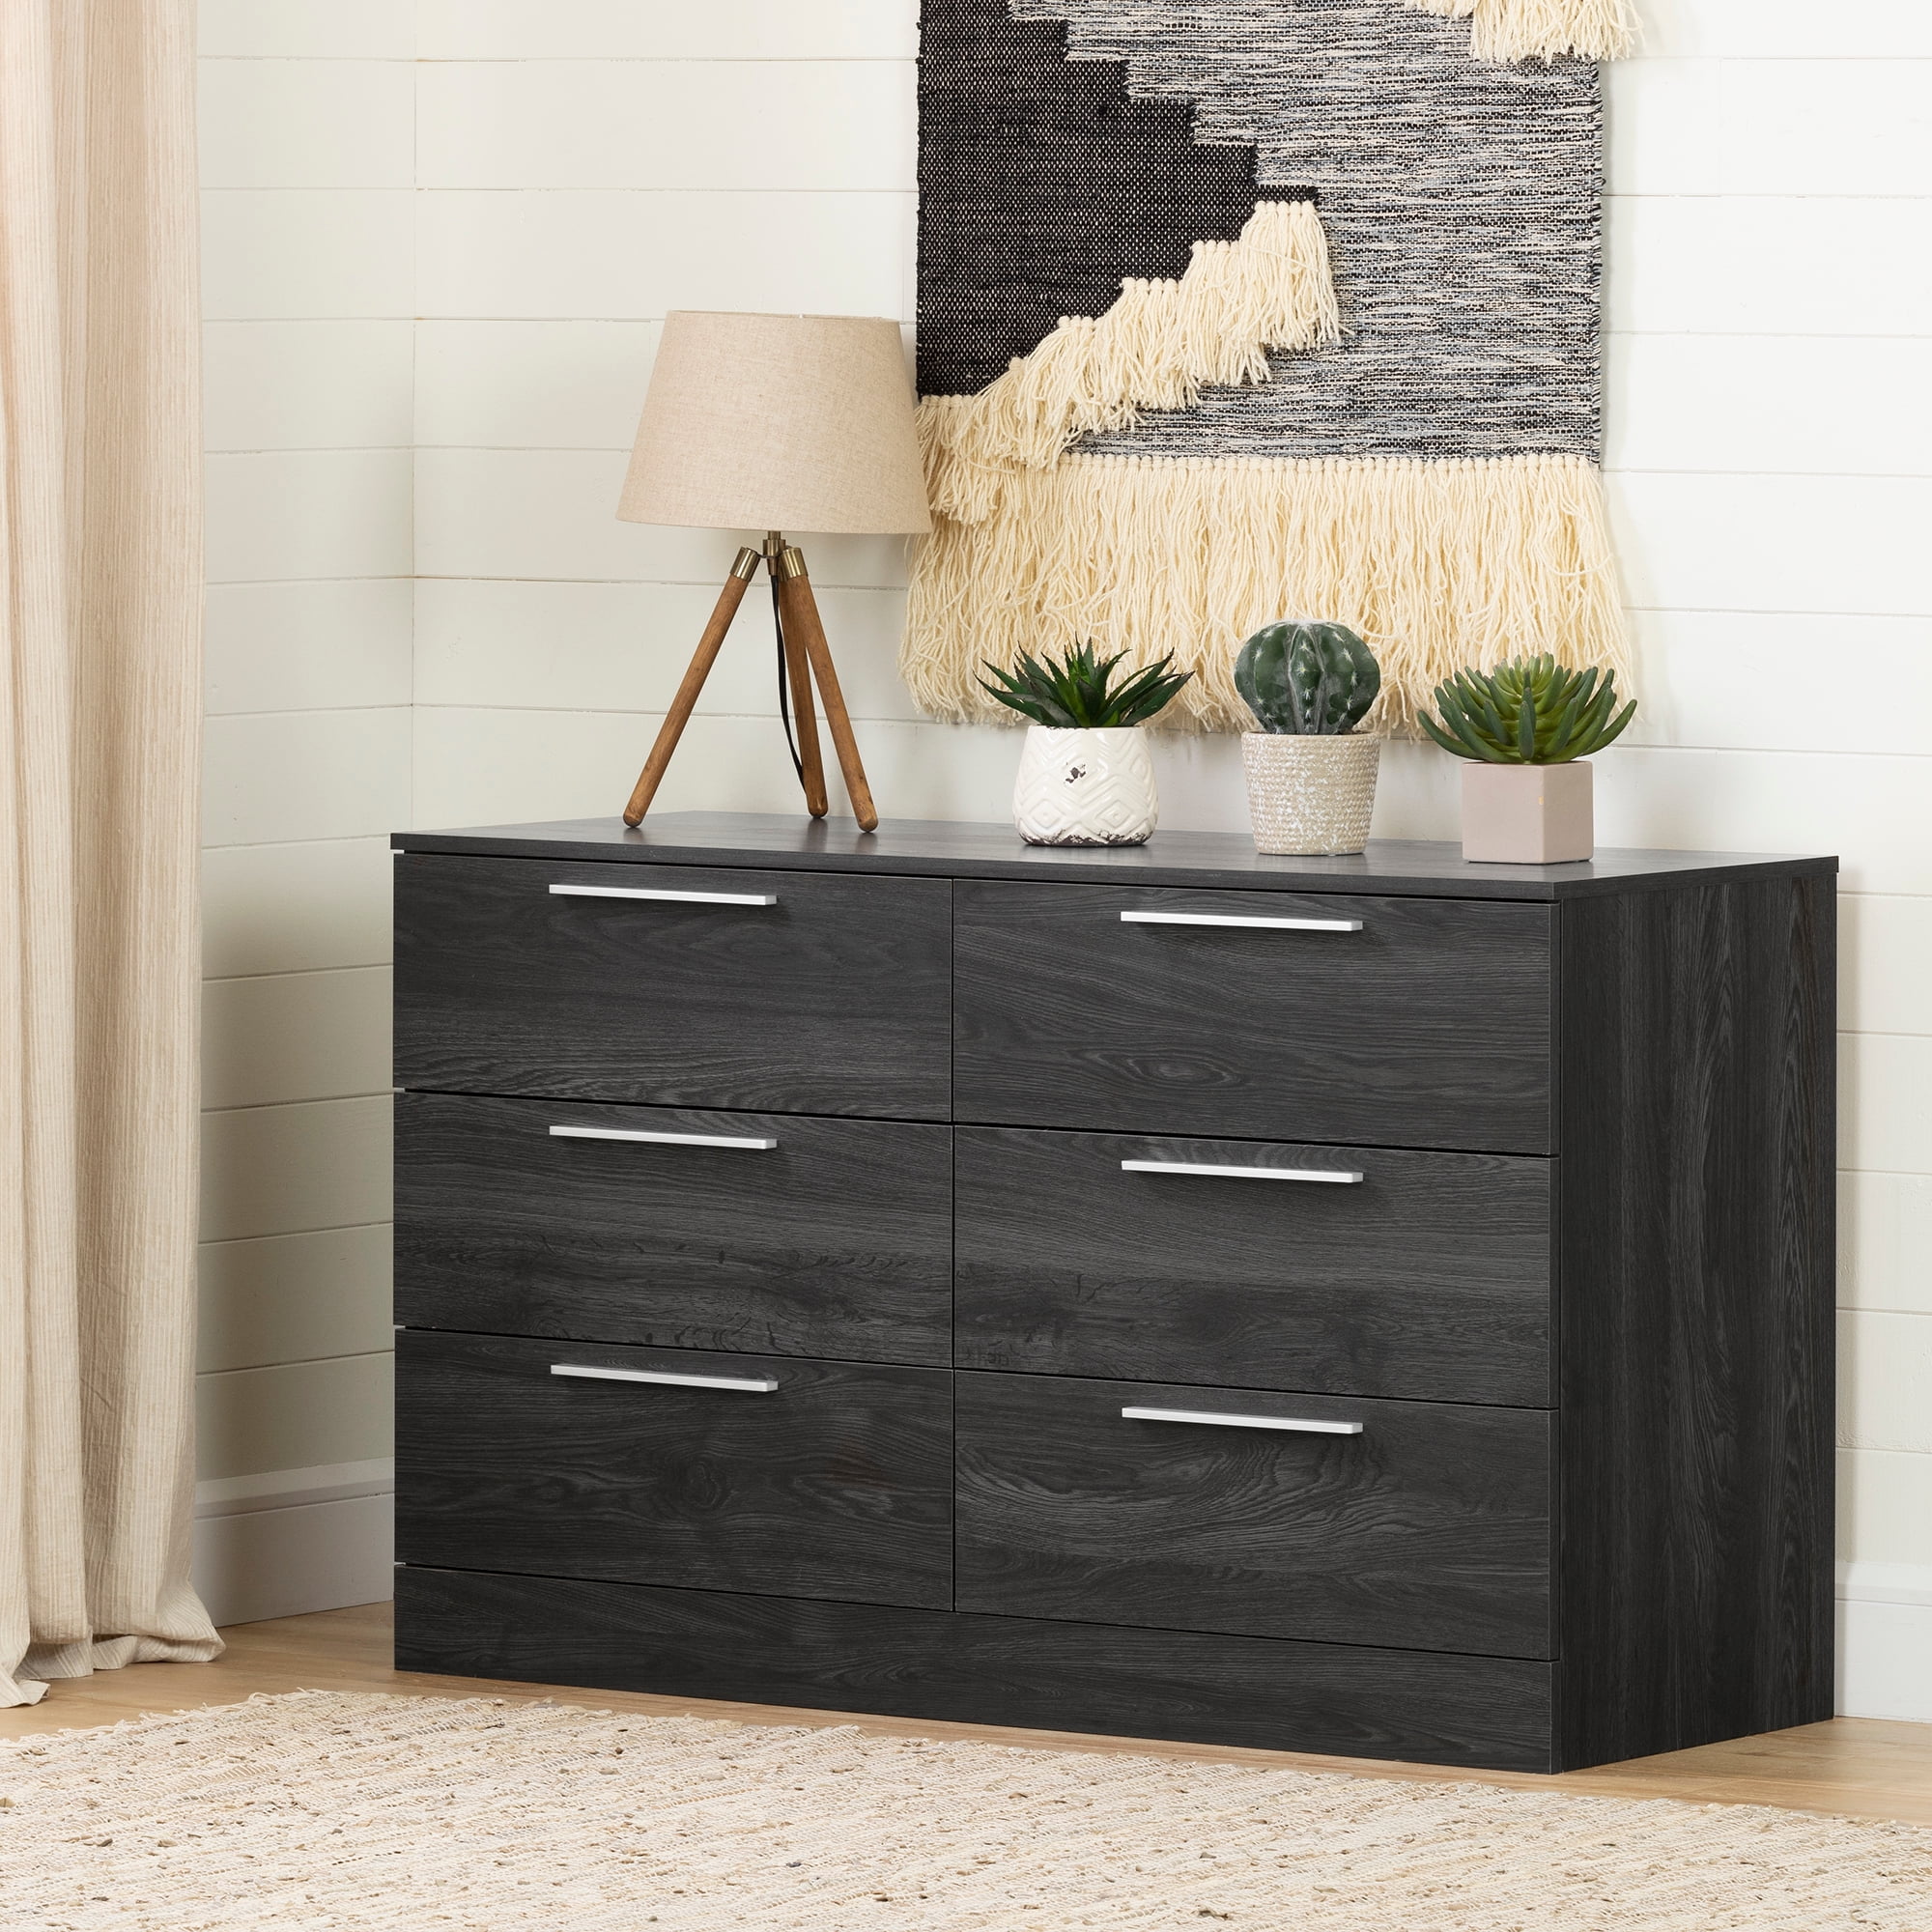 South S Holland 6 Drawer Double, Holland 6 Drawer Double Dresser